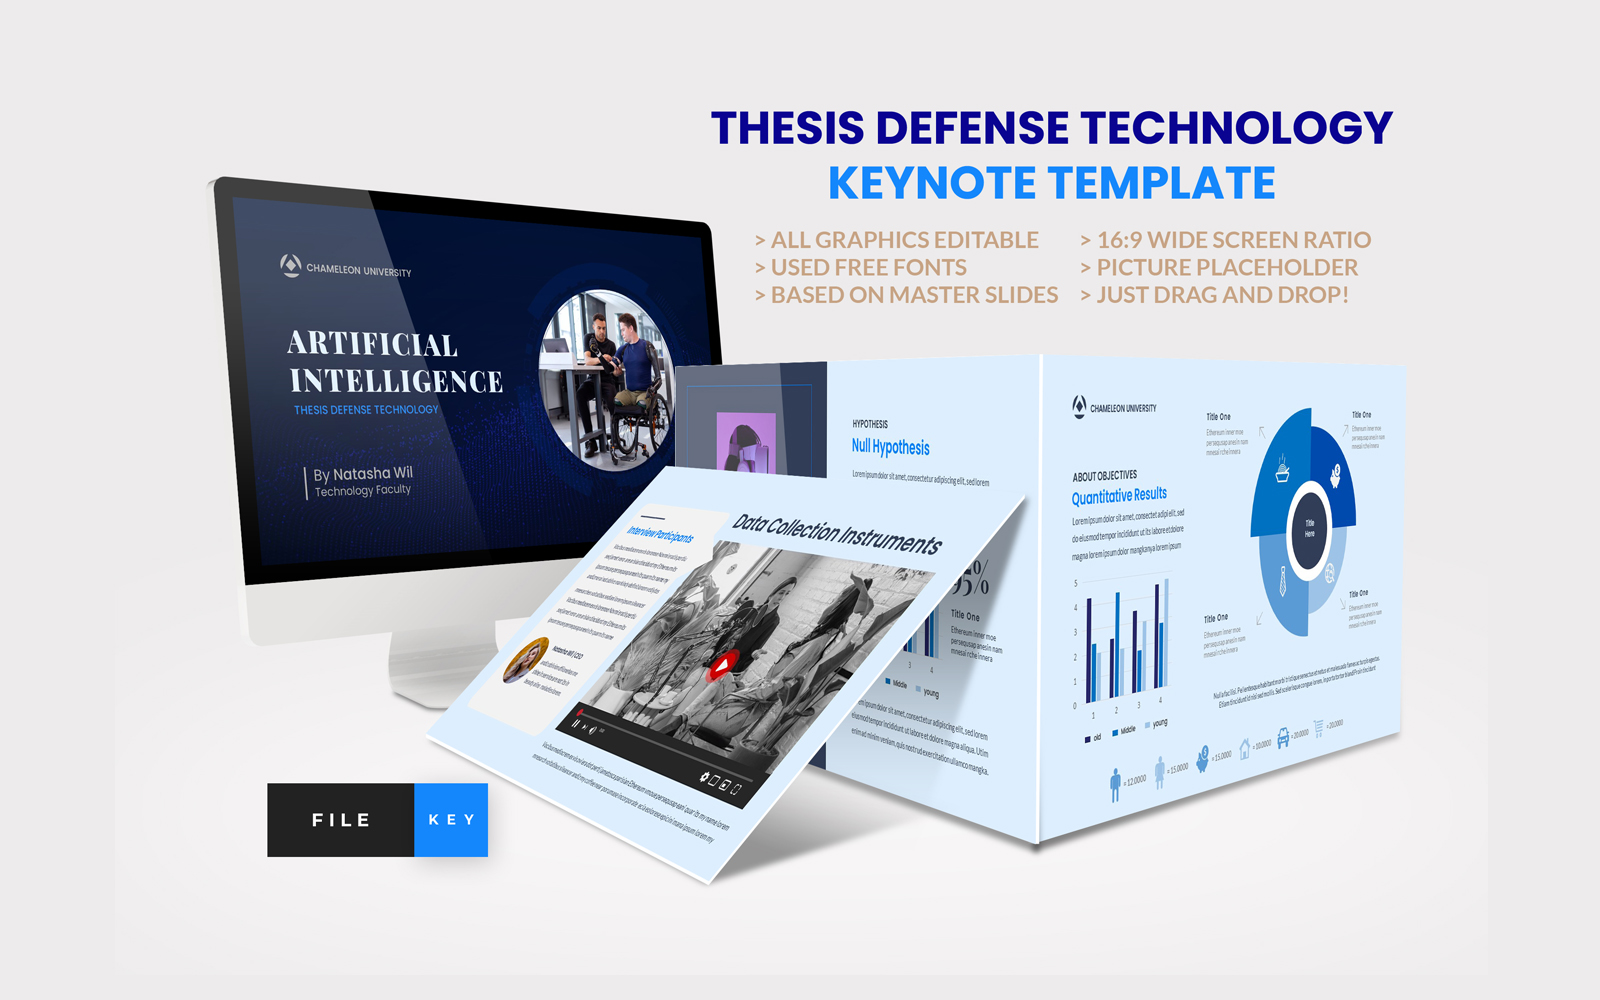 Thesis Defense Technology Keynote Template